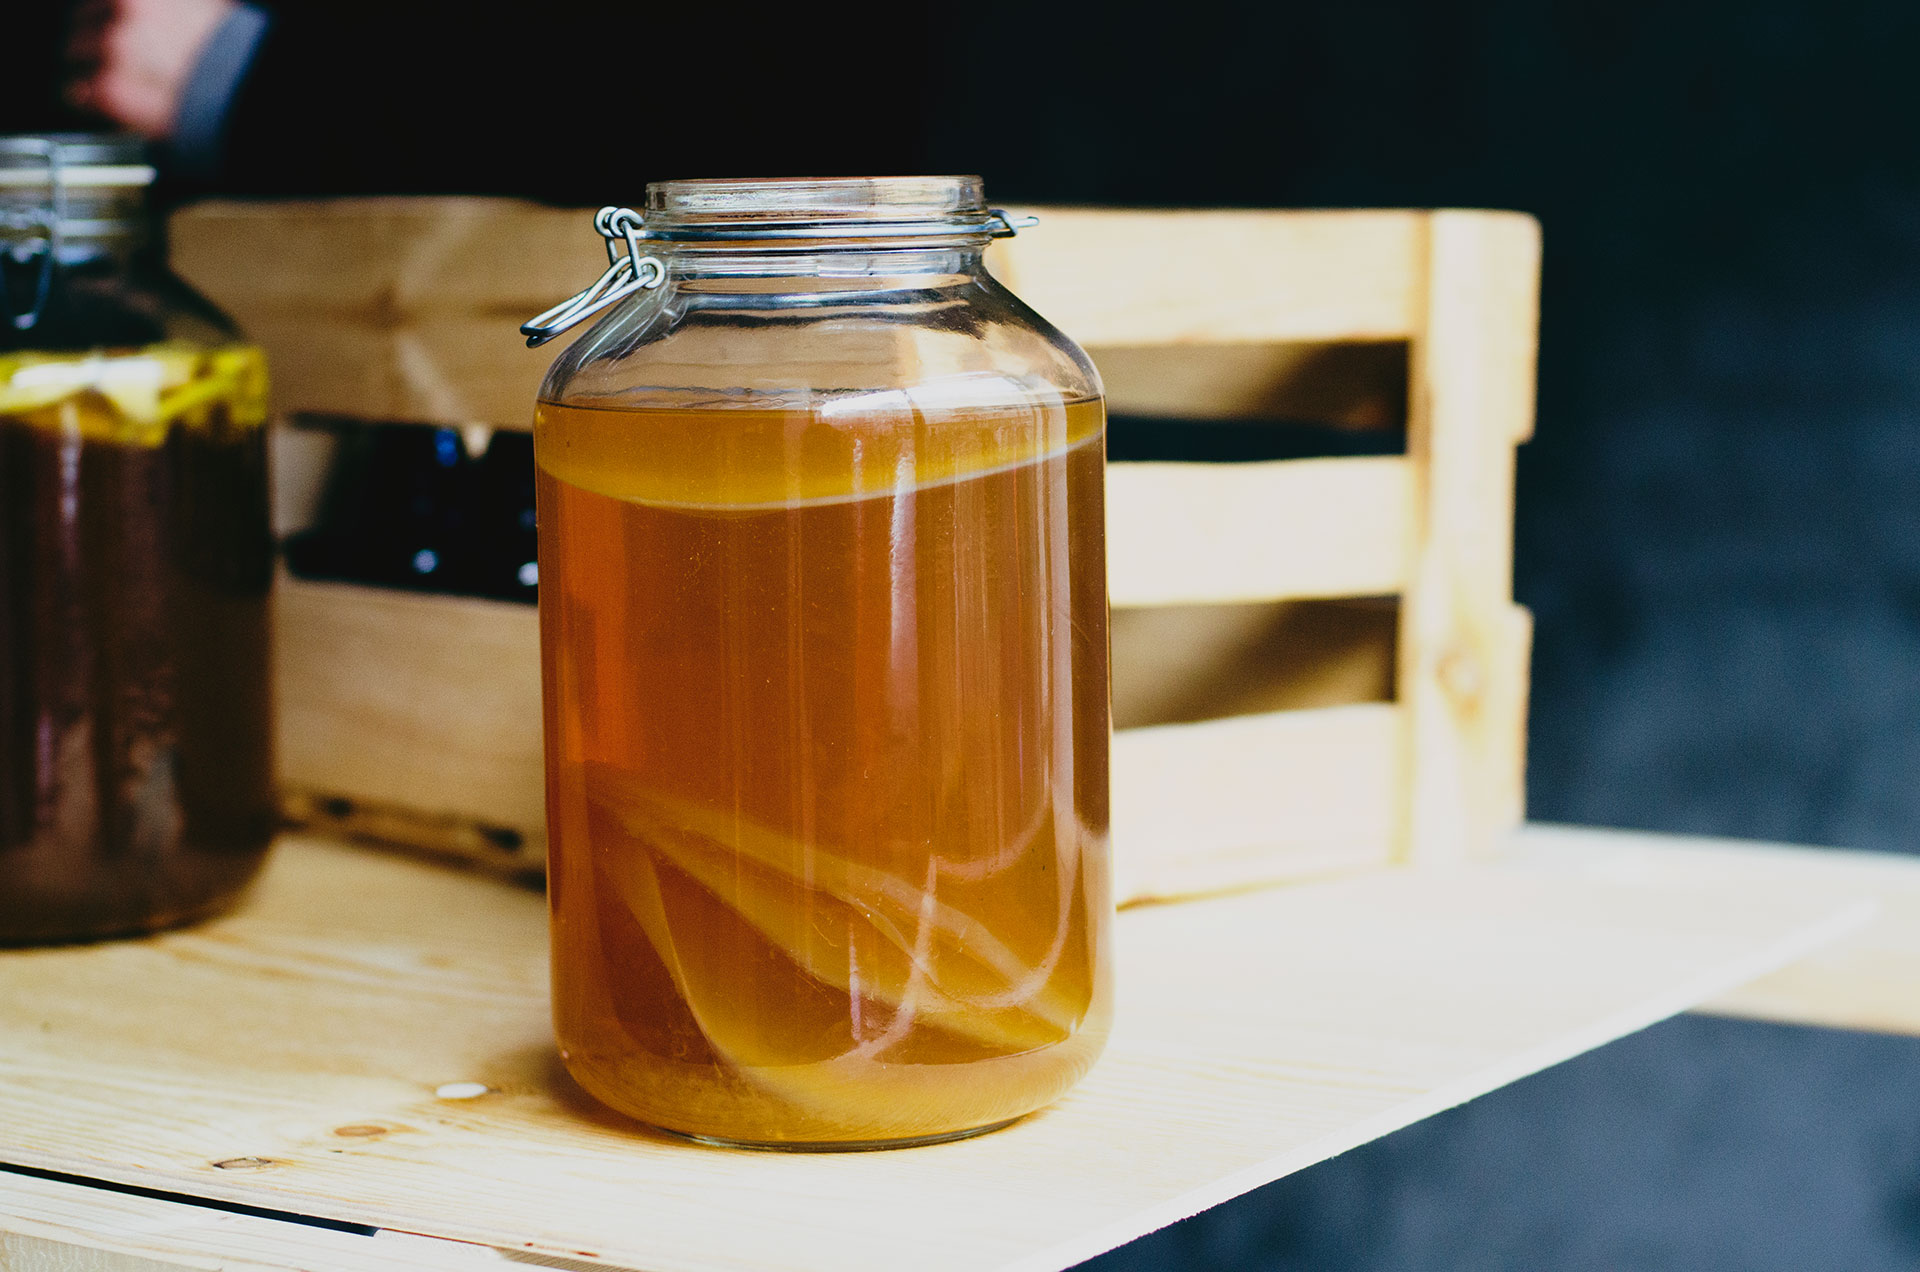 Berlin Kombucha Society made a new batch ofdelicious and healthy fermented tea with a SCOBY